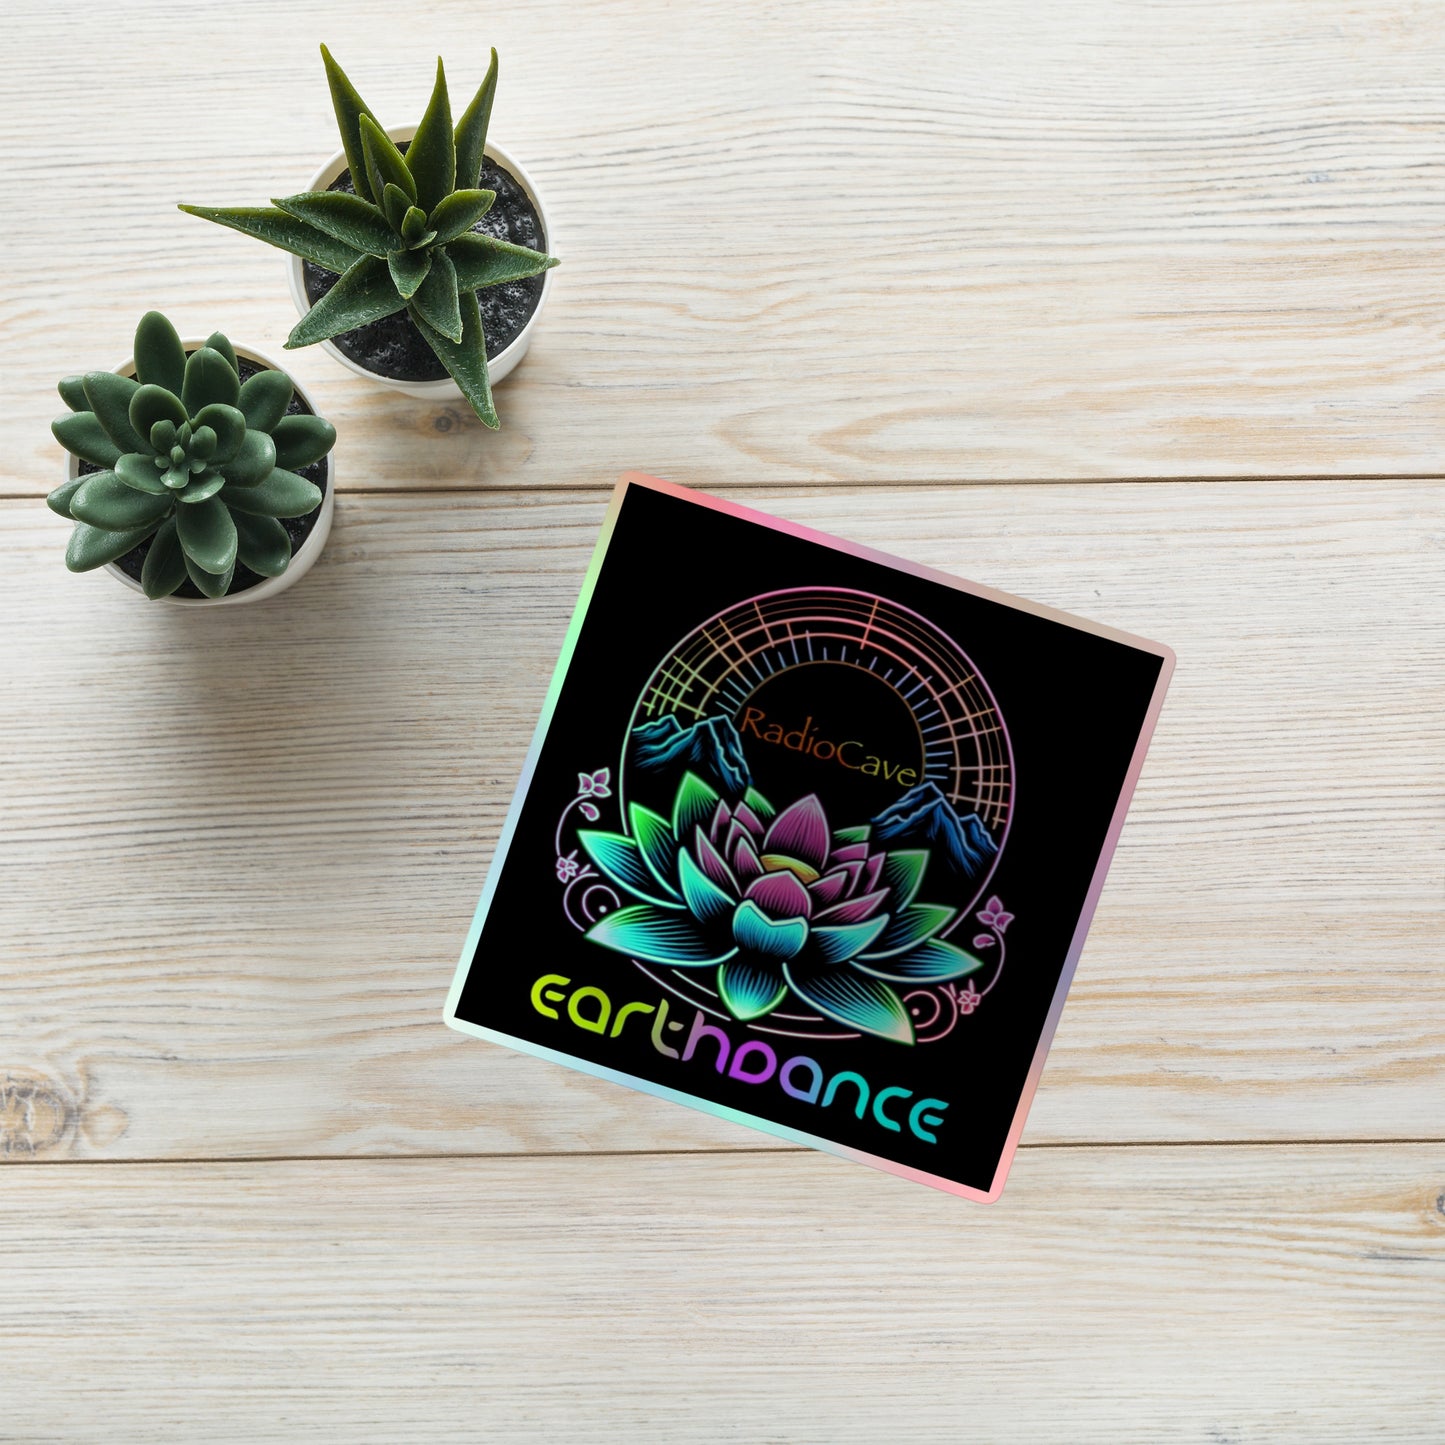 Earthdance RadioCave Holographic Stickers